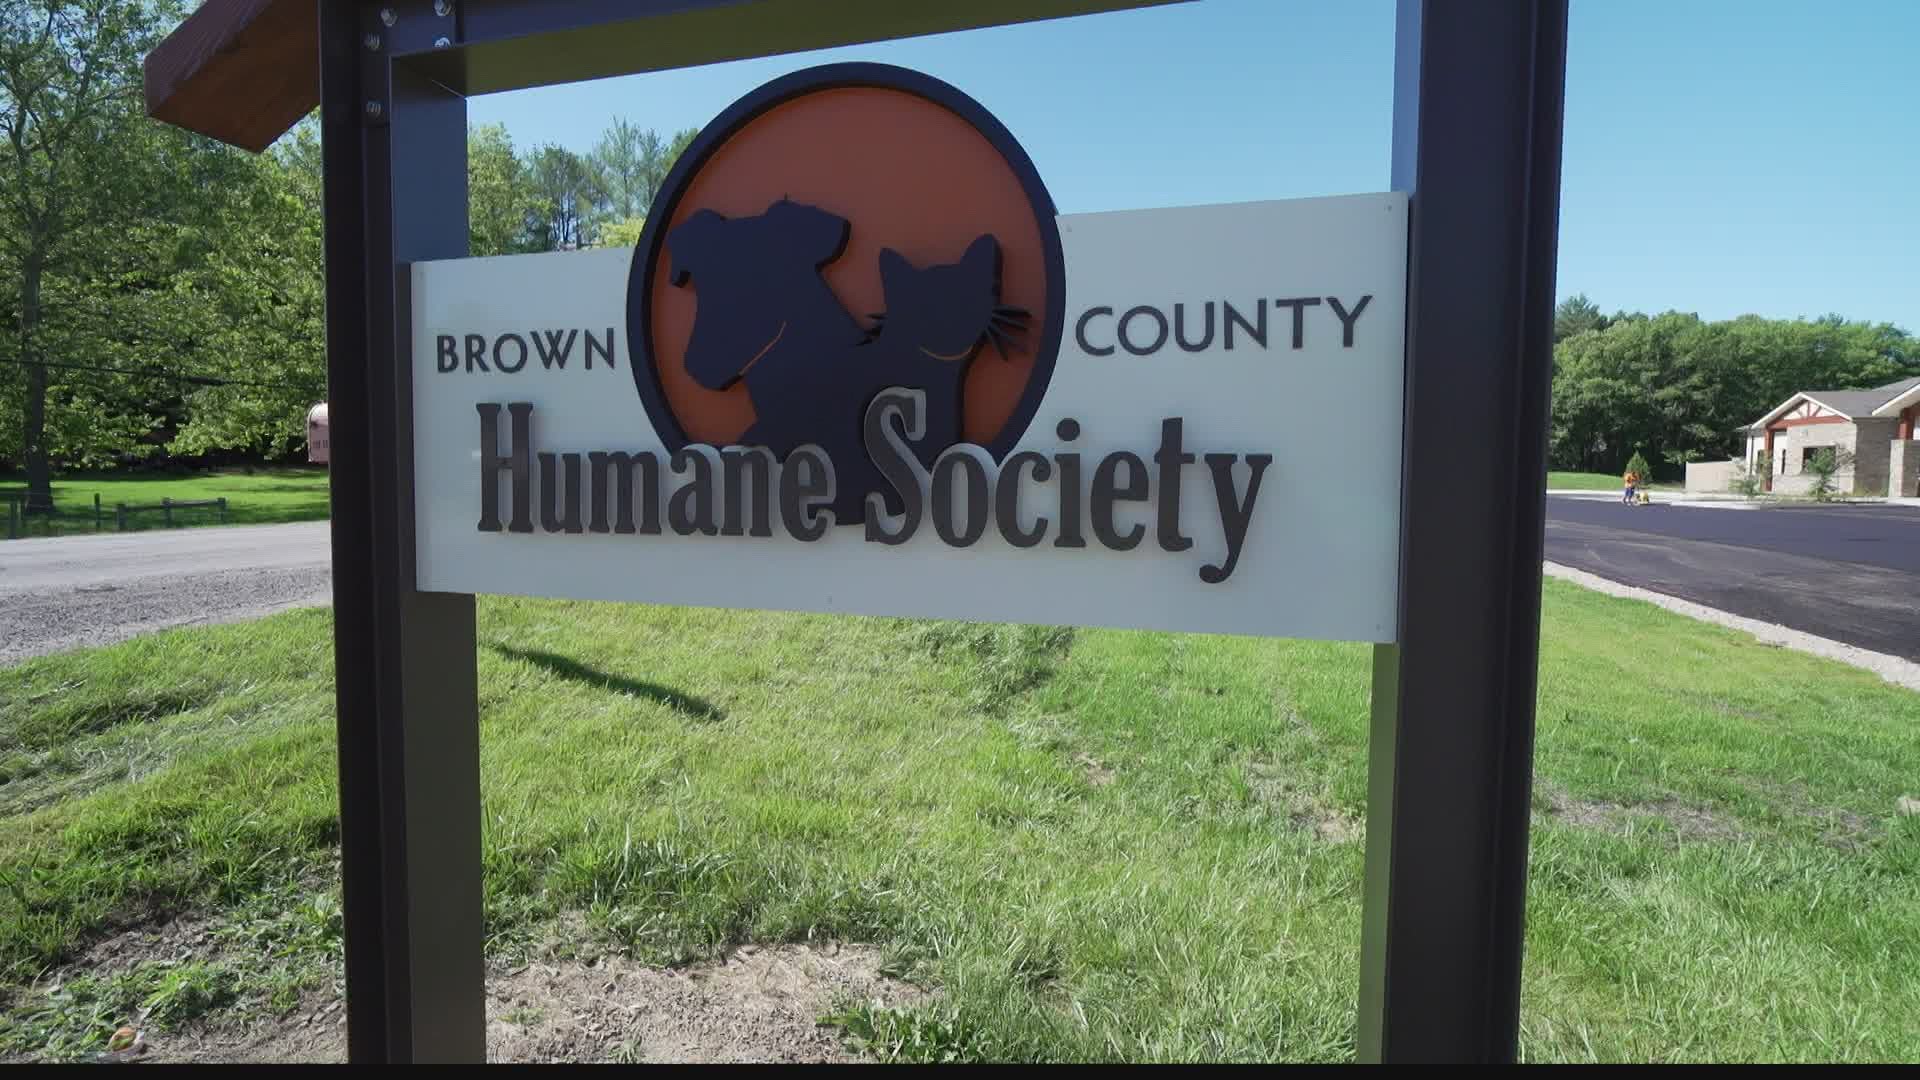 After serving the community out of a 4,000 square foot building for over 30 years, the Brown County Humane Society just moved into a brand new facility.